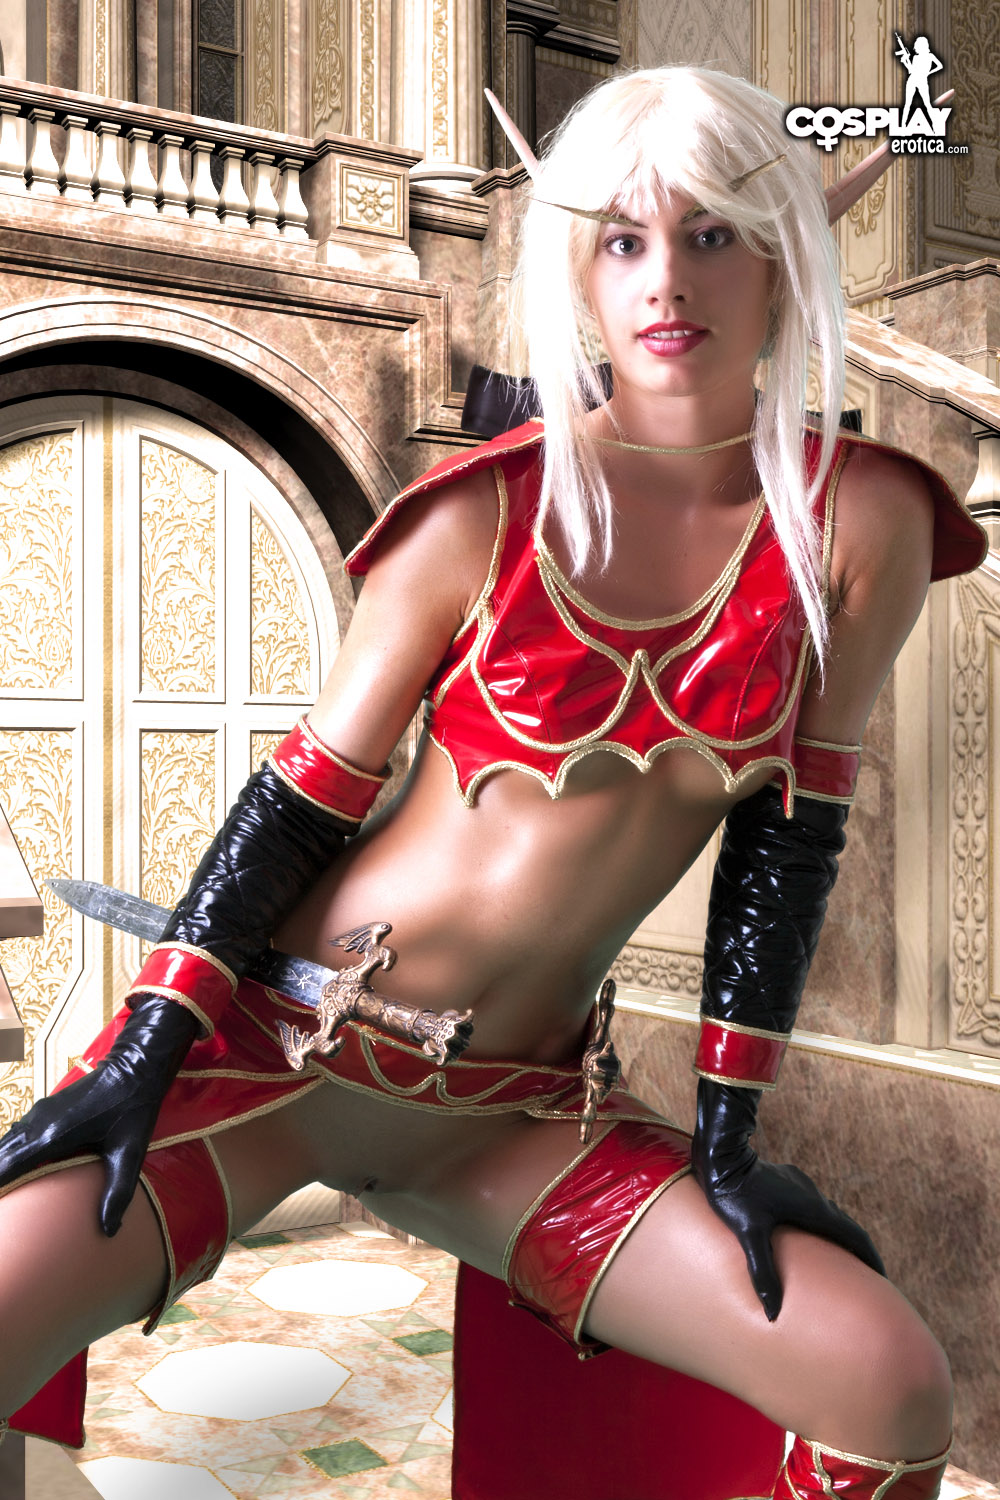 Nudes female cosplay Asian Nudes,